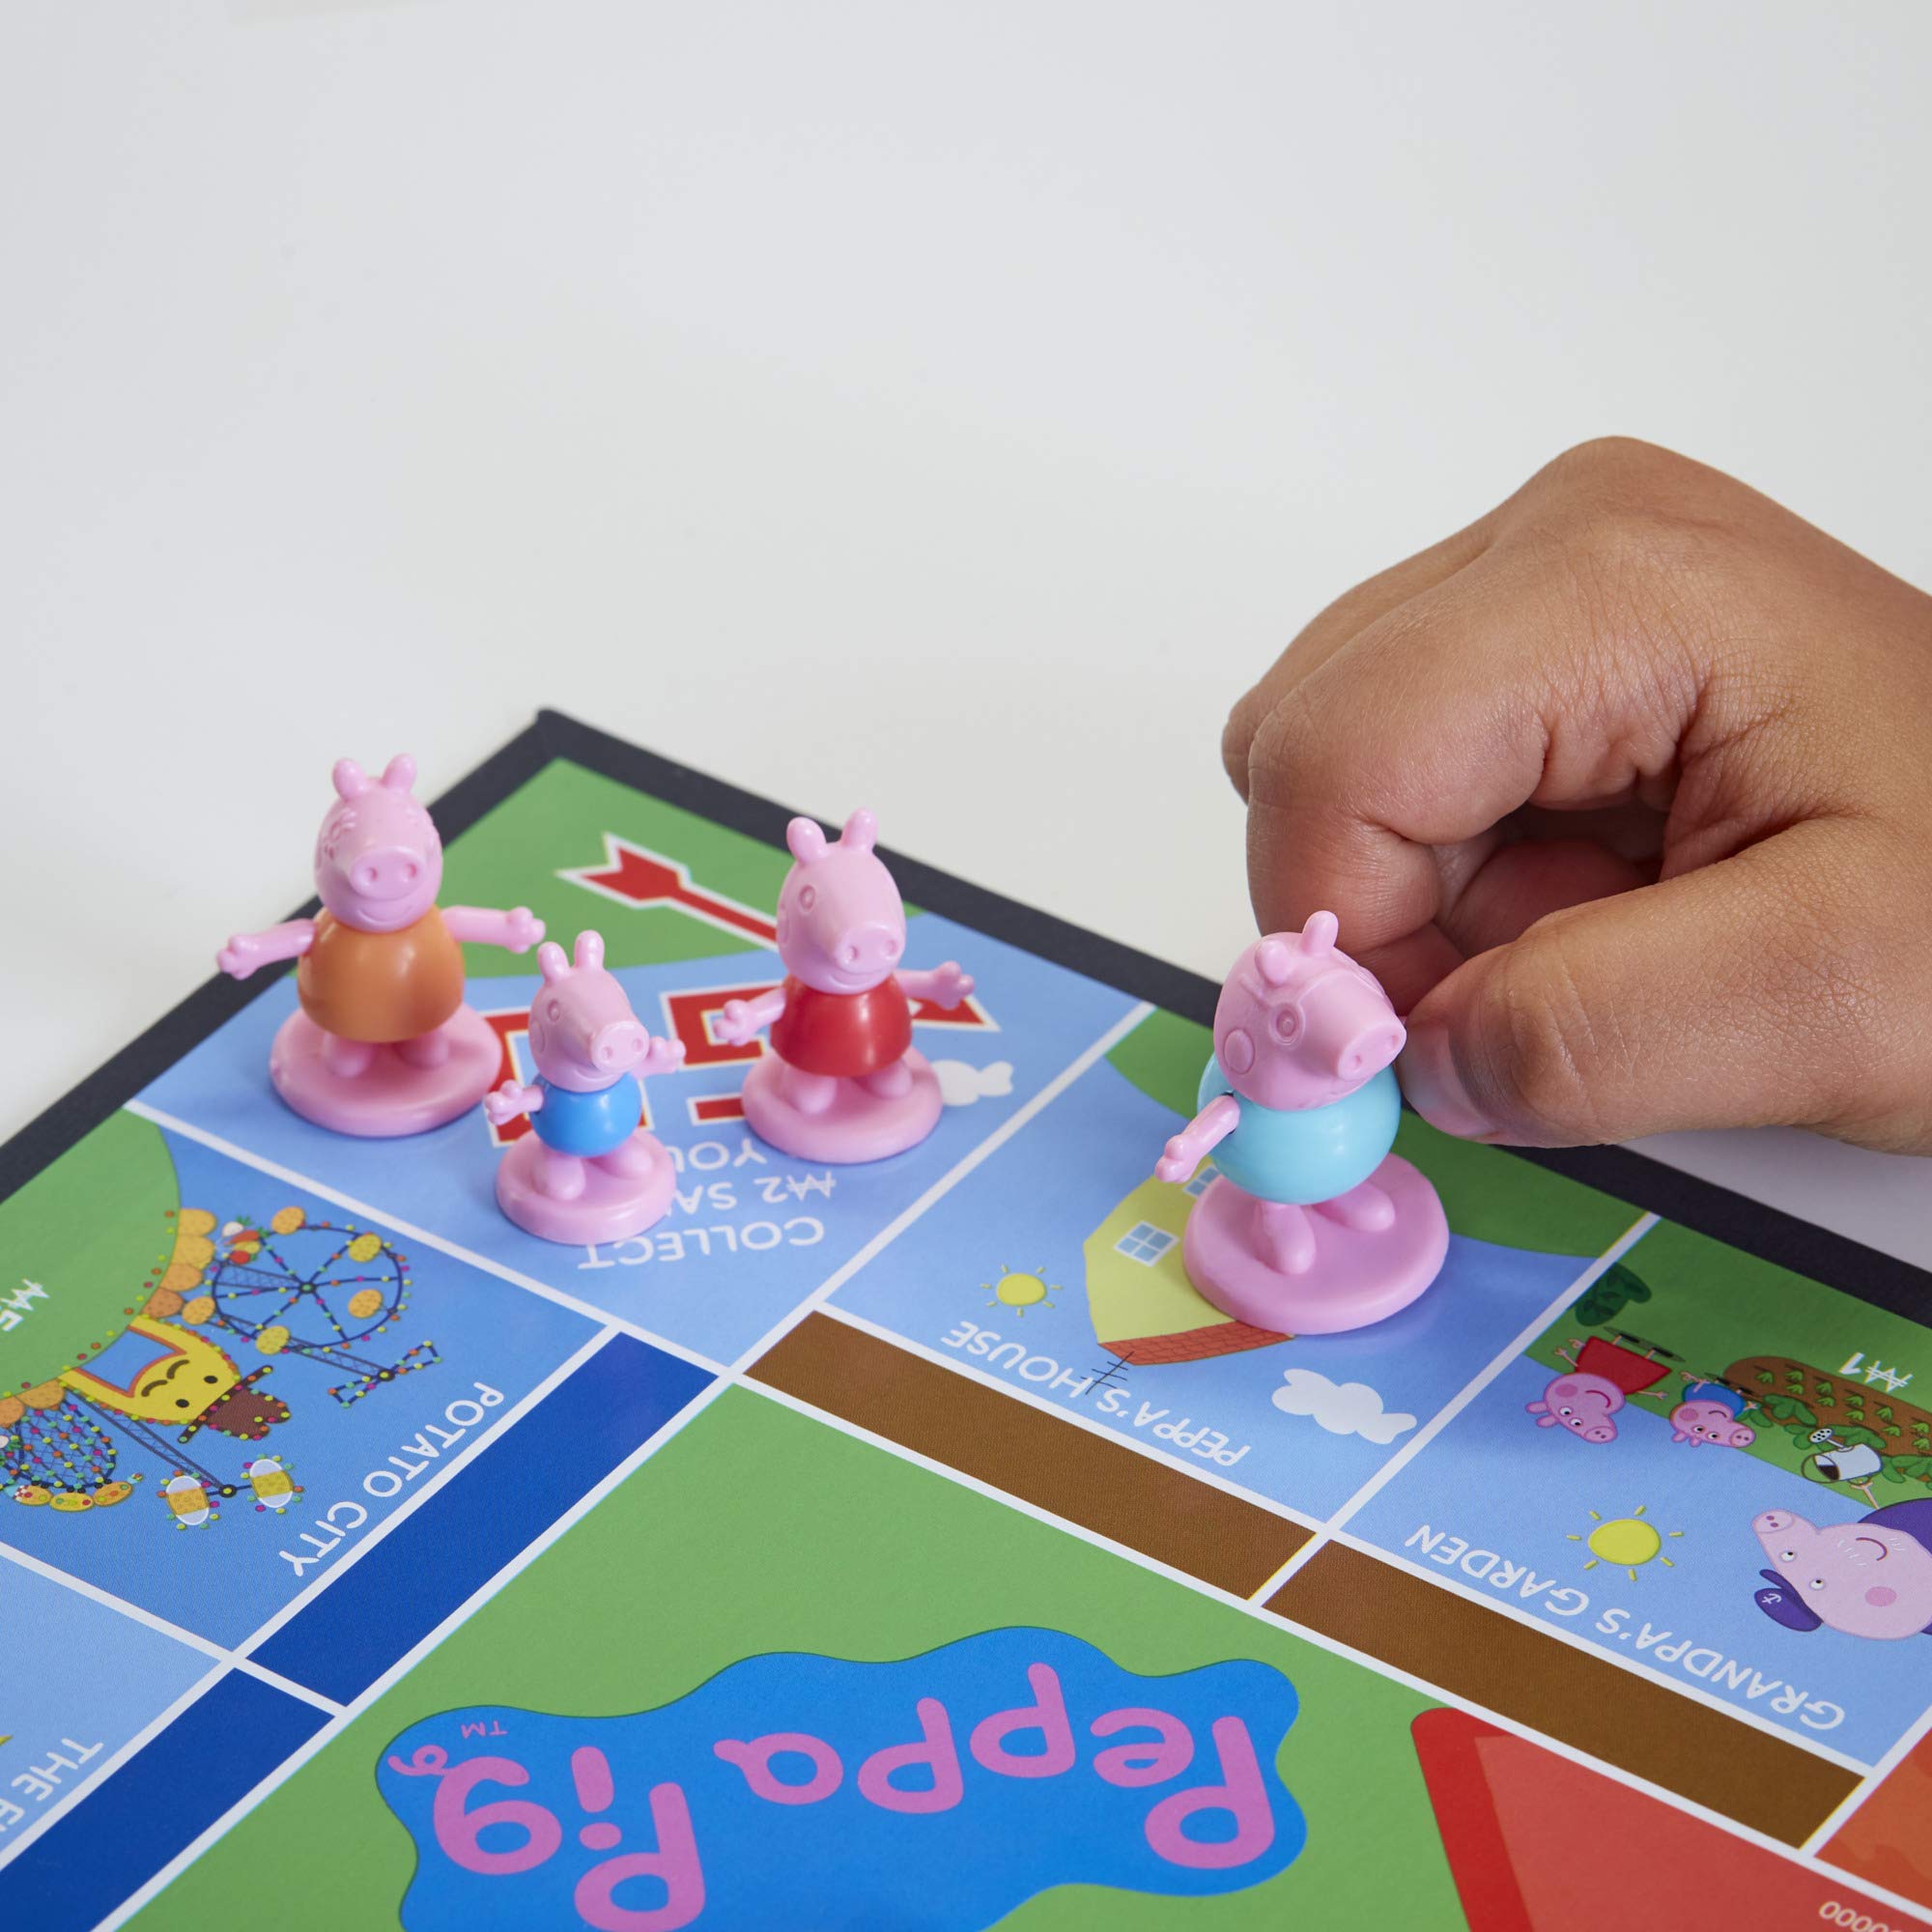 Monopoly Junior: Peppa Pig Edition Board Game for 2-4 Players, Indoor Games for Kids, Peppa Pig Toys and Games, Ages 5+ (Amazon Exclusive)